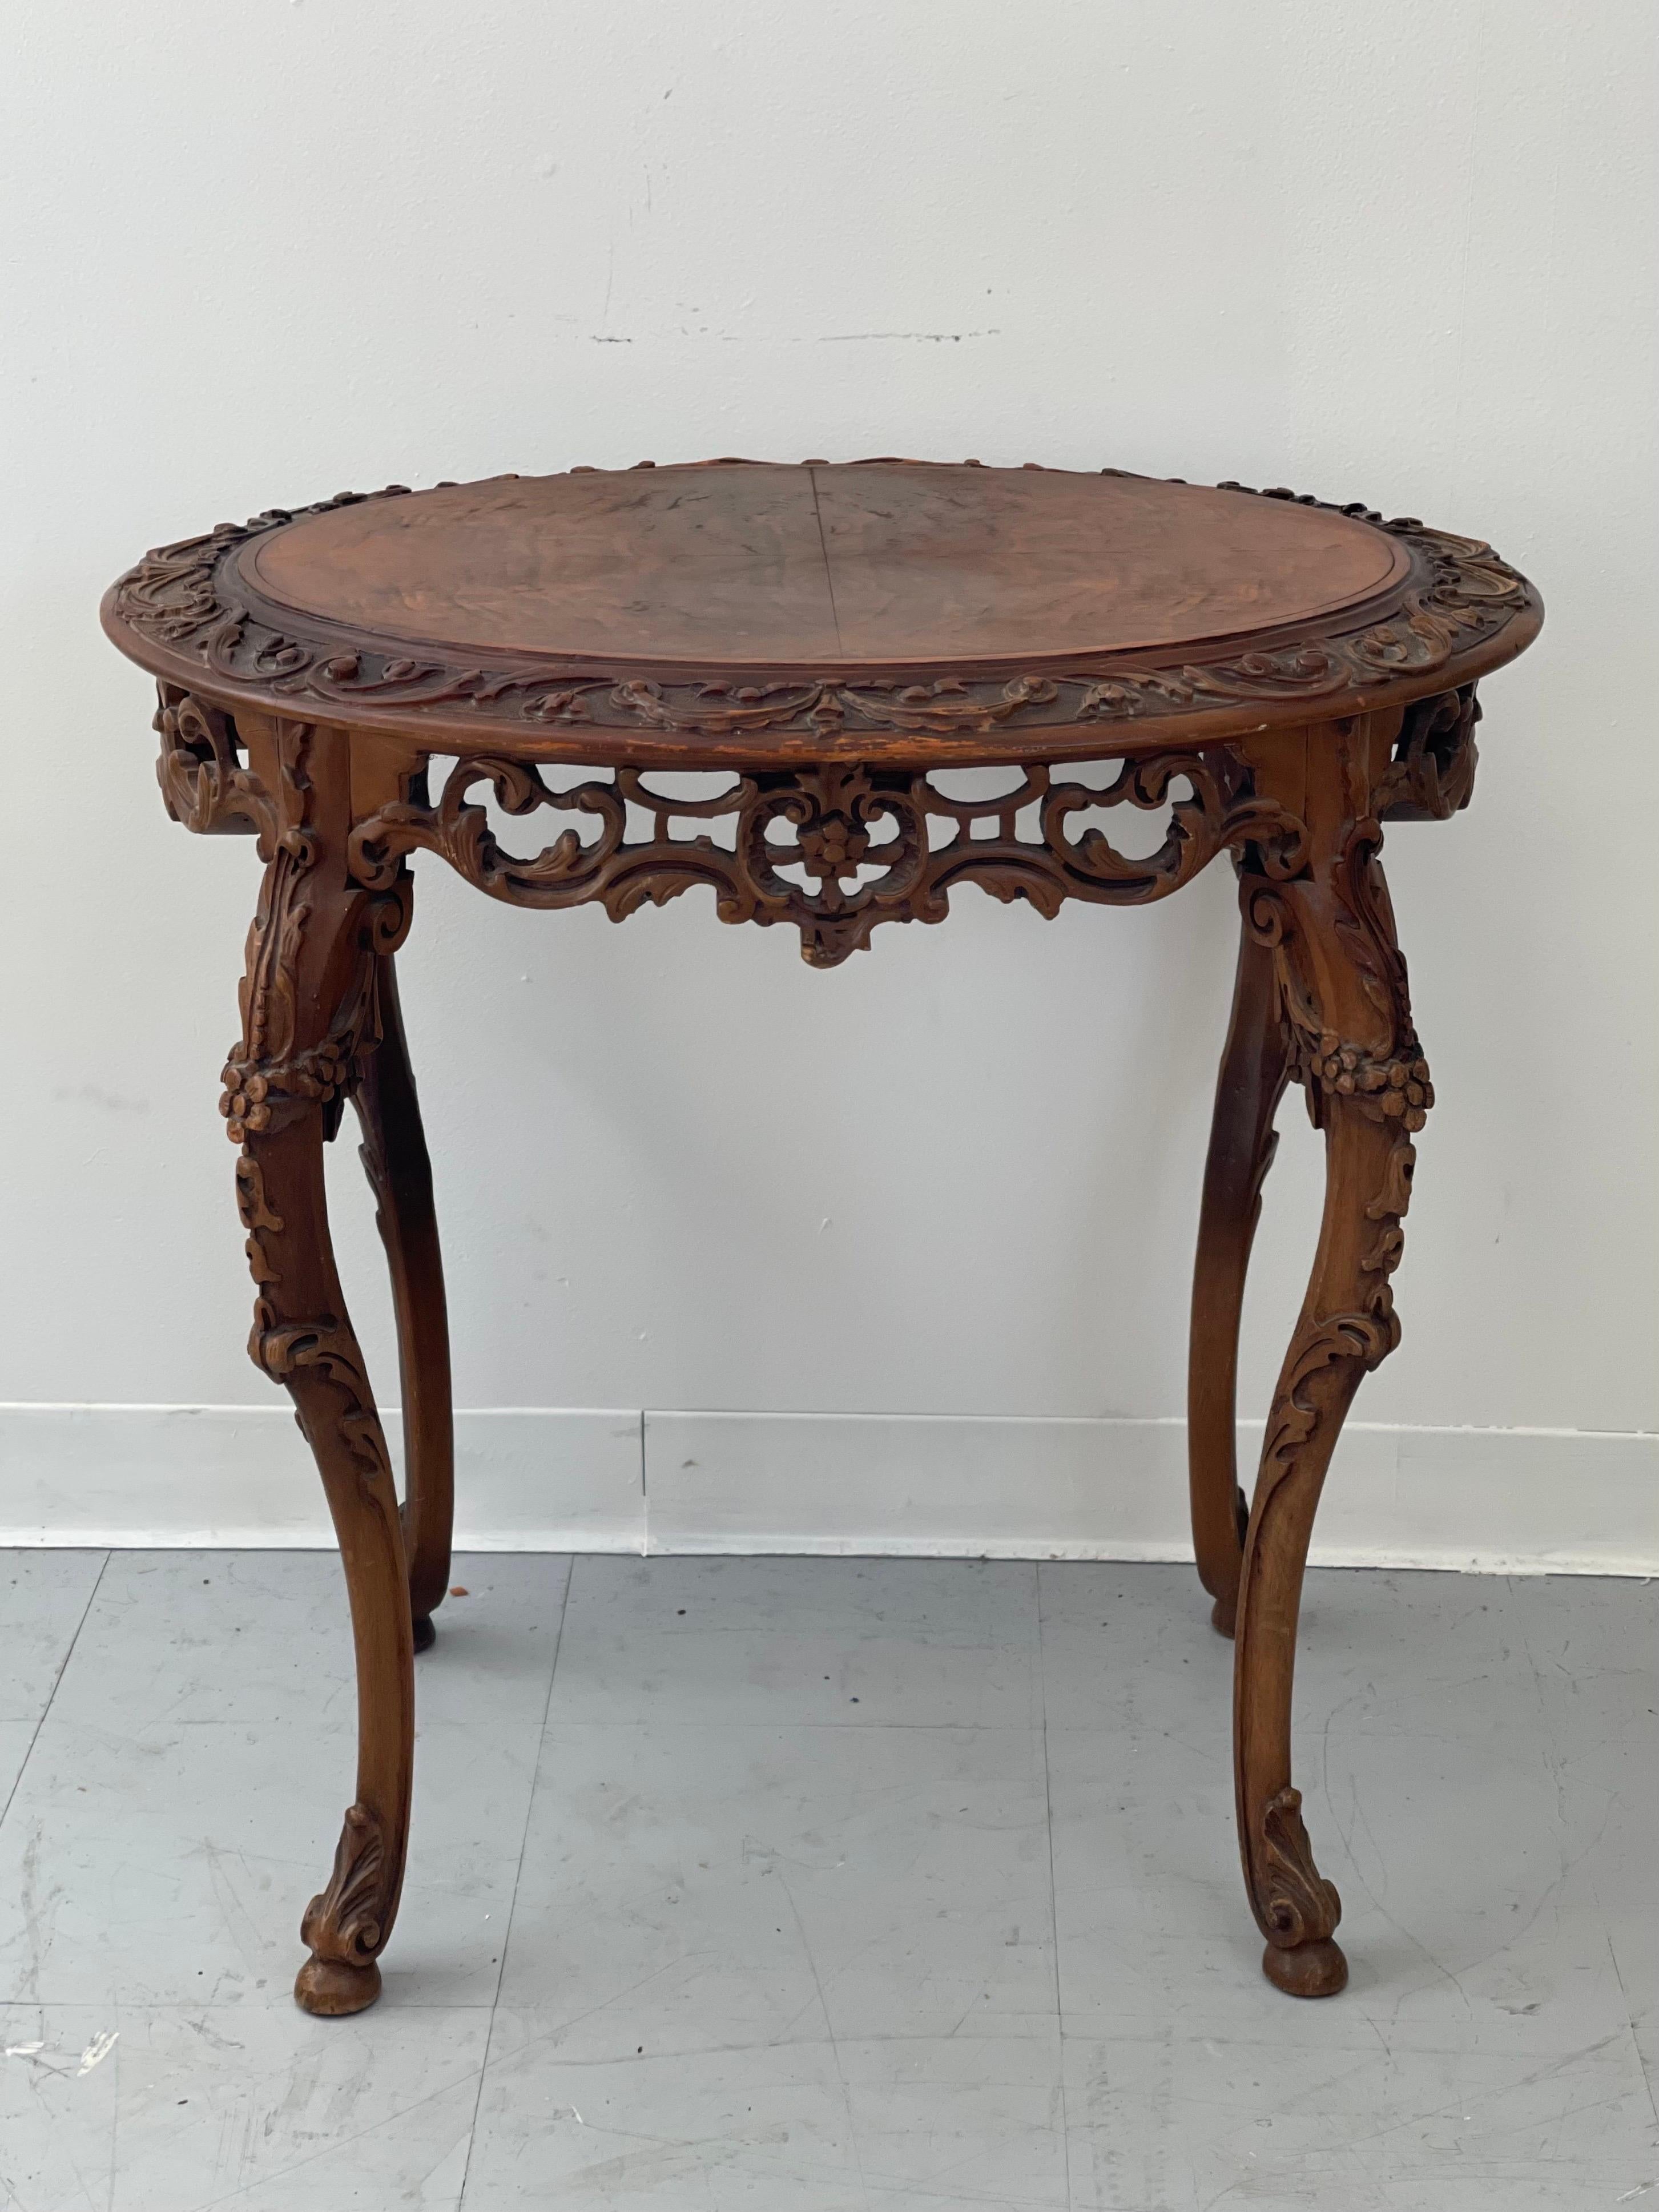 Antique  table stand 

Dimensions. 30 W ; 23 D ; 29 H.